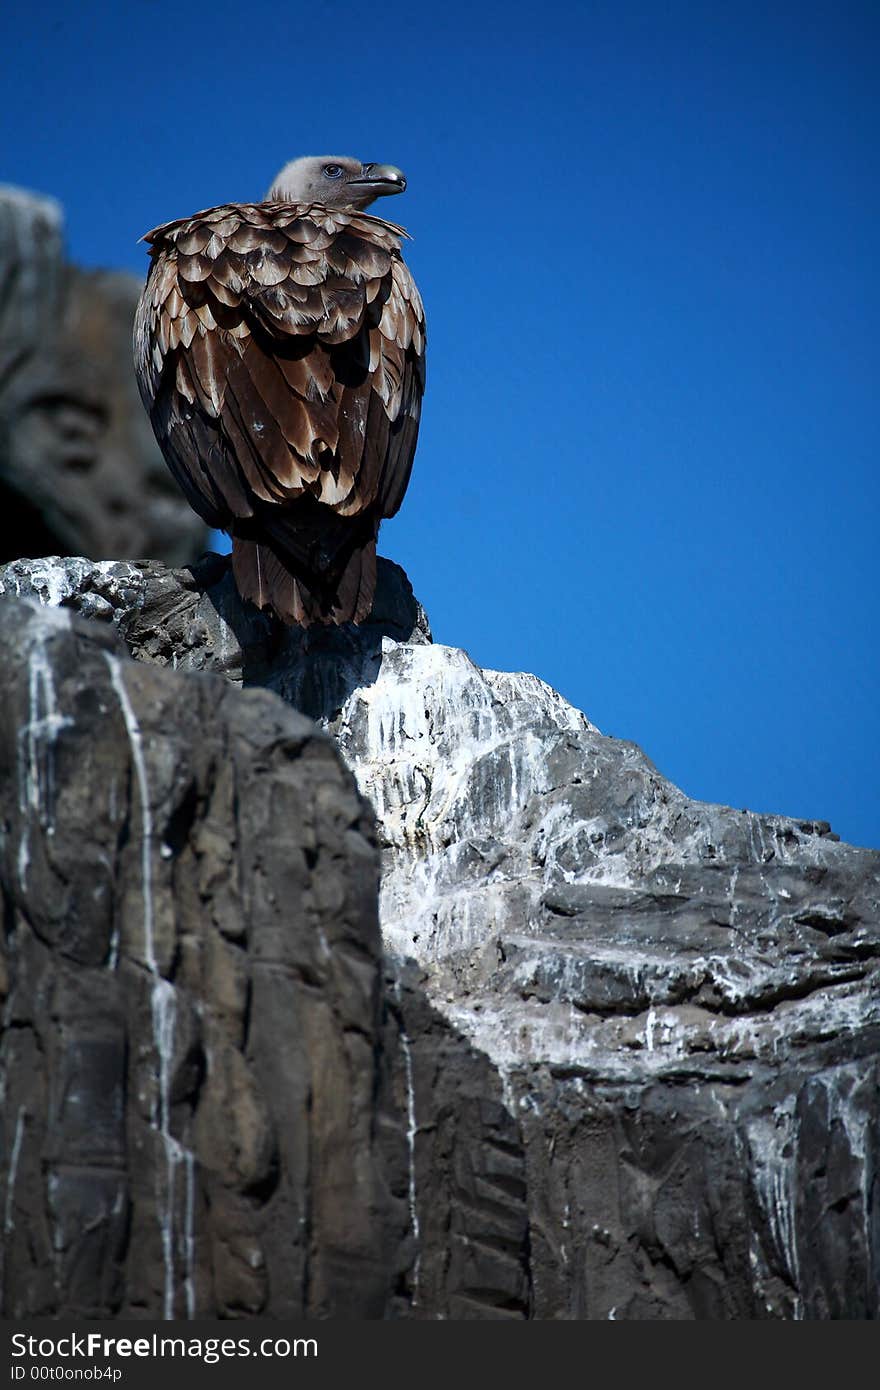 A vulture on the stone